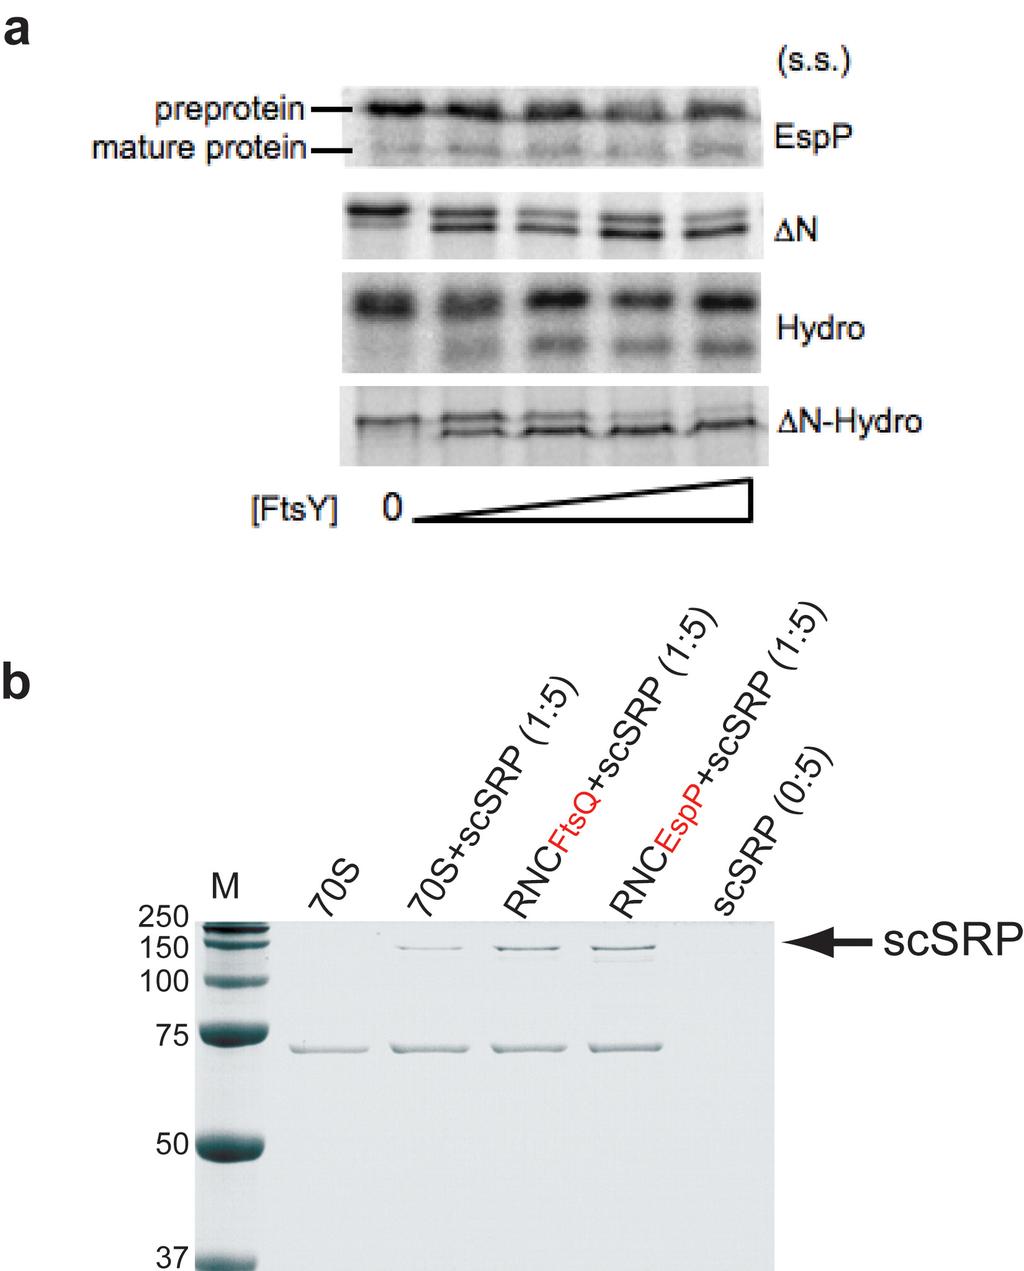 Supplementary Figure 1: In vitro translocation of EspP signal sequence variants and SRP binding to ribosomal complexes.